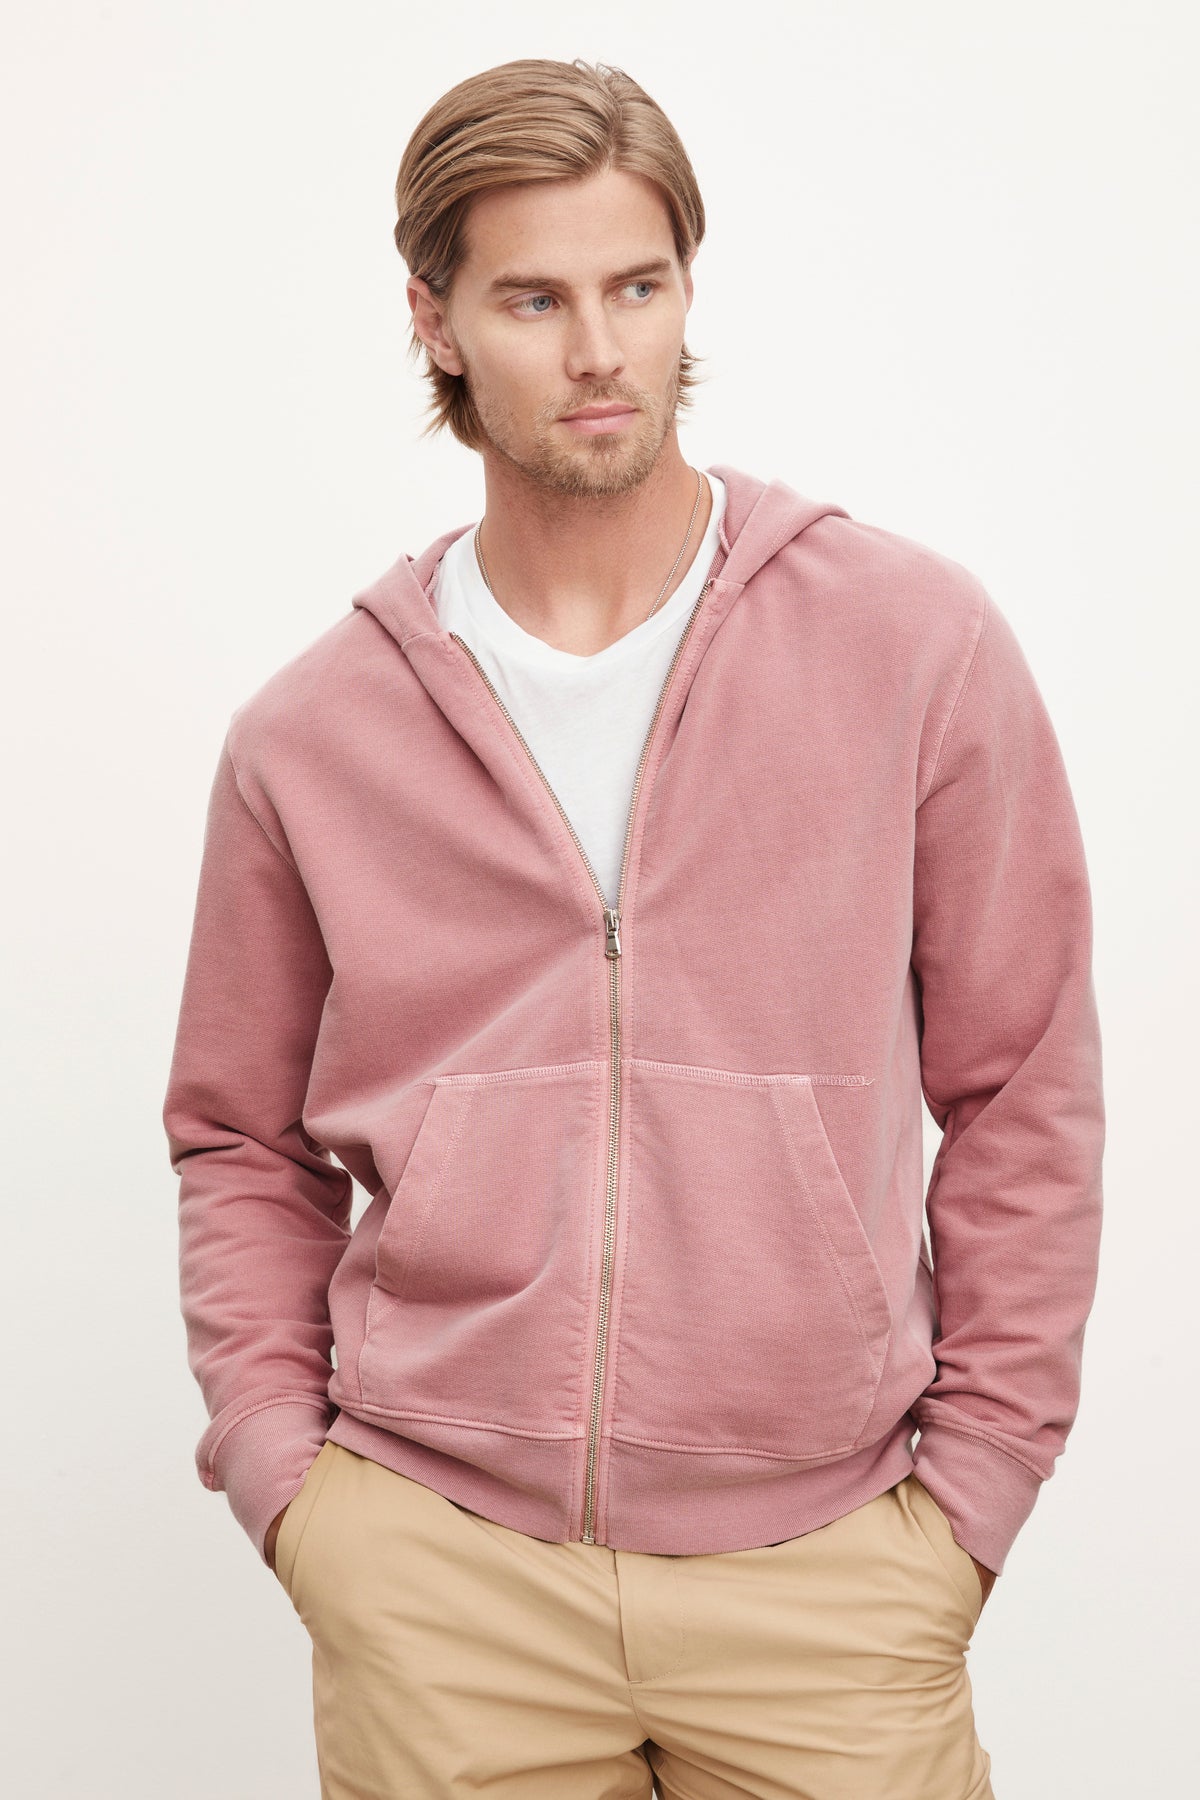   A man wearing a Velvet by Graham & Spencer VINCENT HOODIE in pink over a white t-shirt, paired with beige pants, posing against a plain background. 